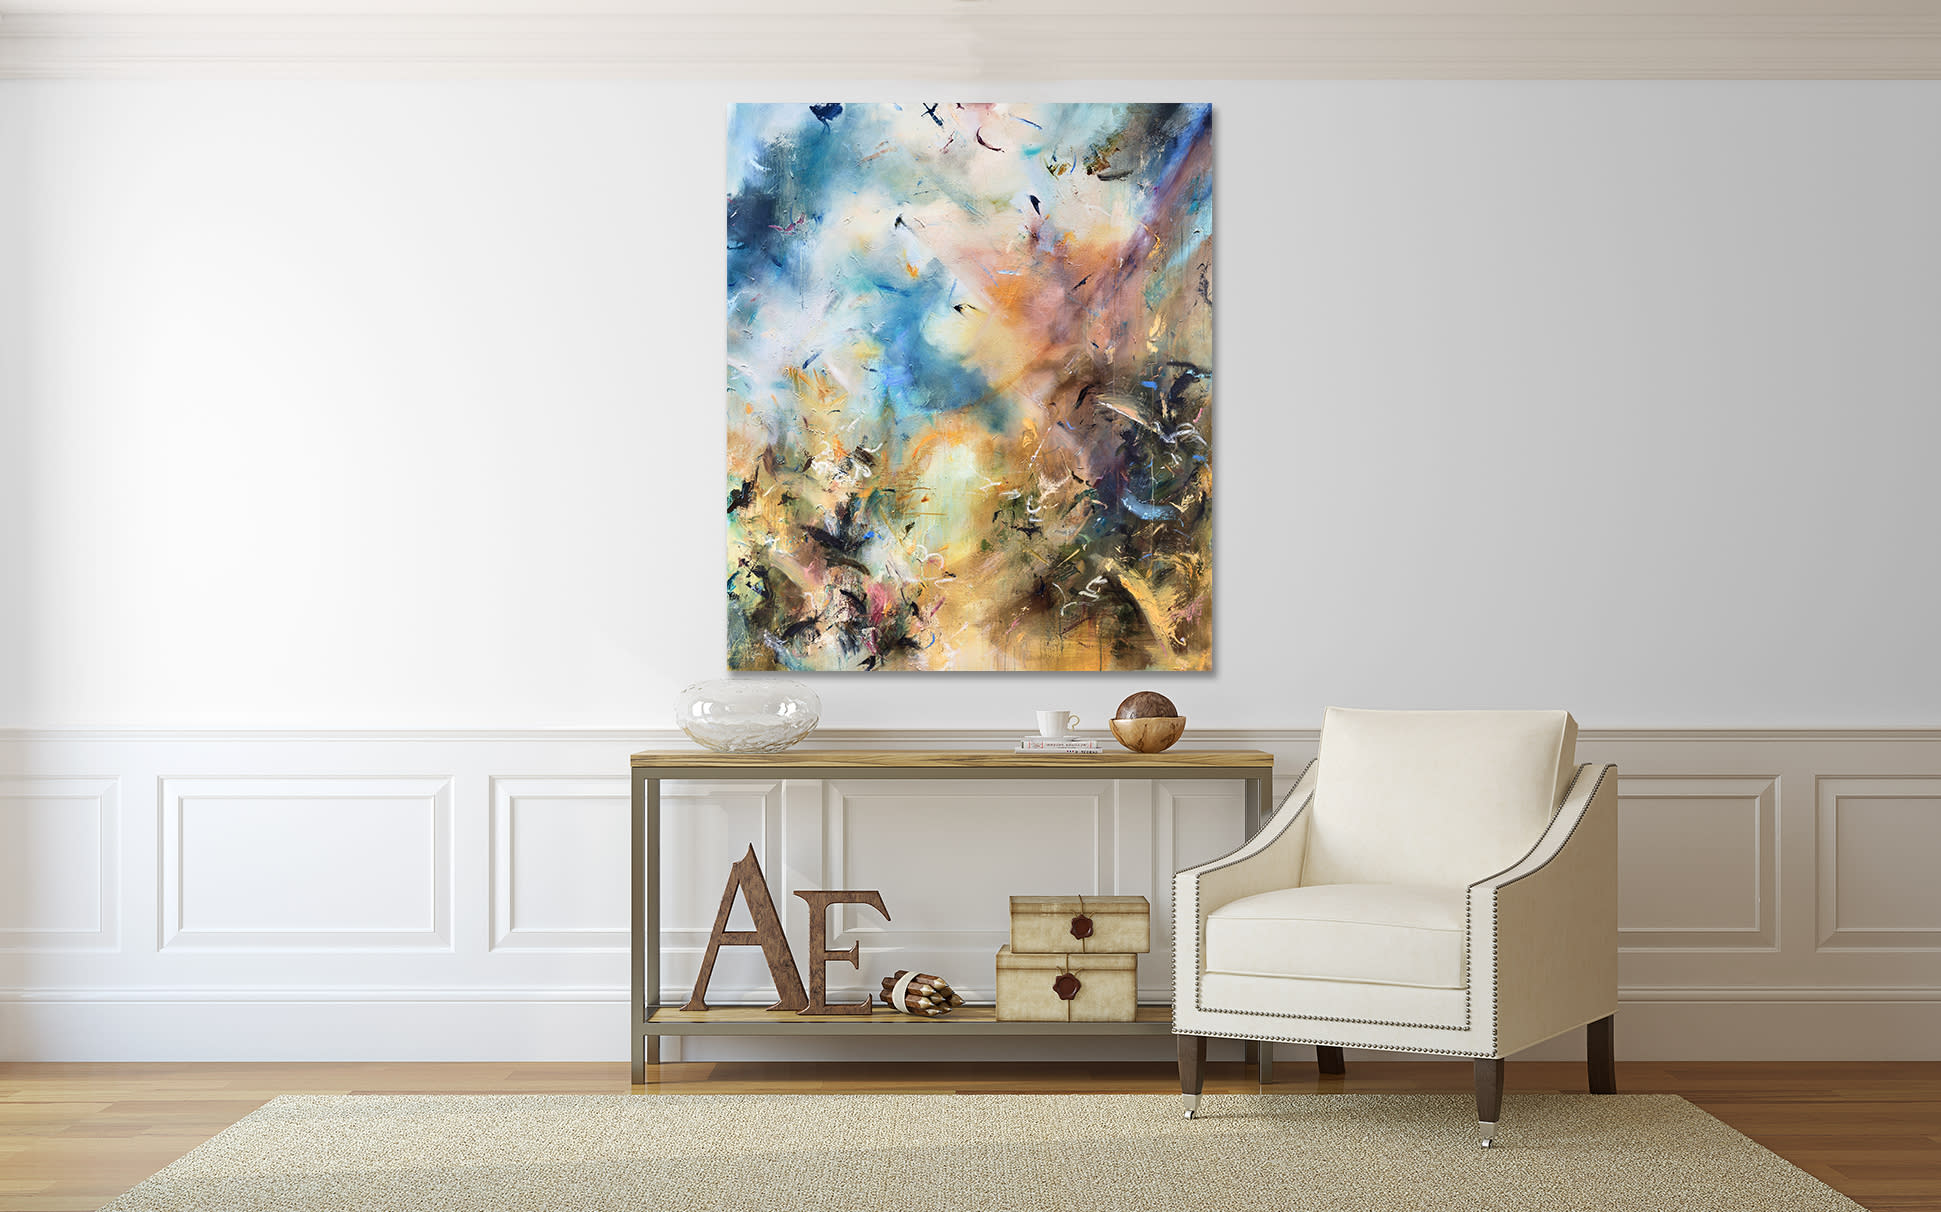 
        <div class='title'>
          contemporary-abstract-painting-in-living-room
        </div>
       
        <div class='description'>
          
        </div>
      